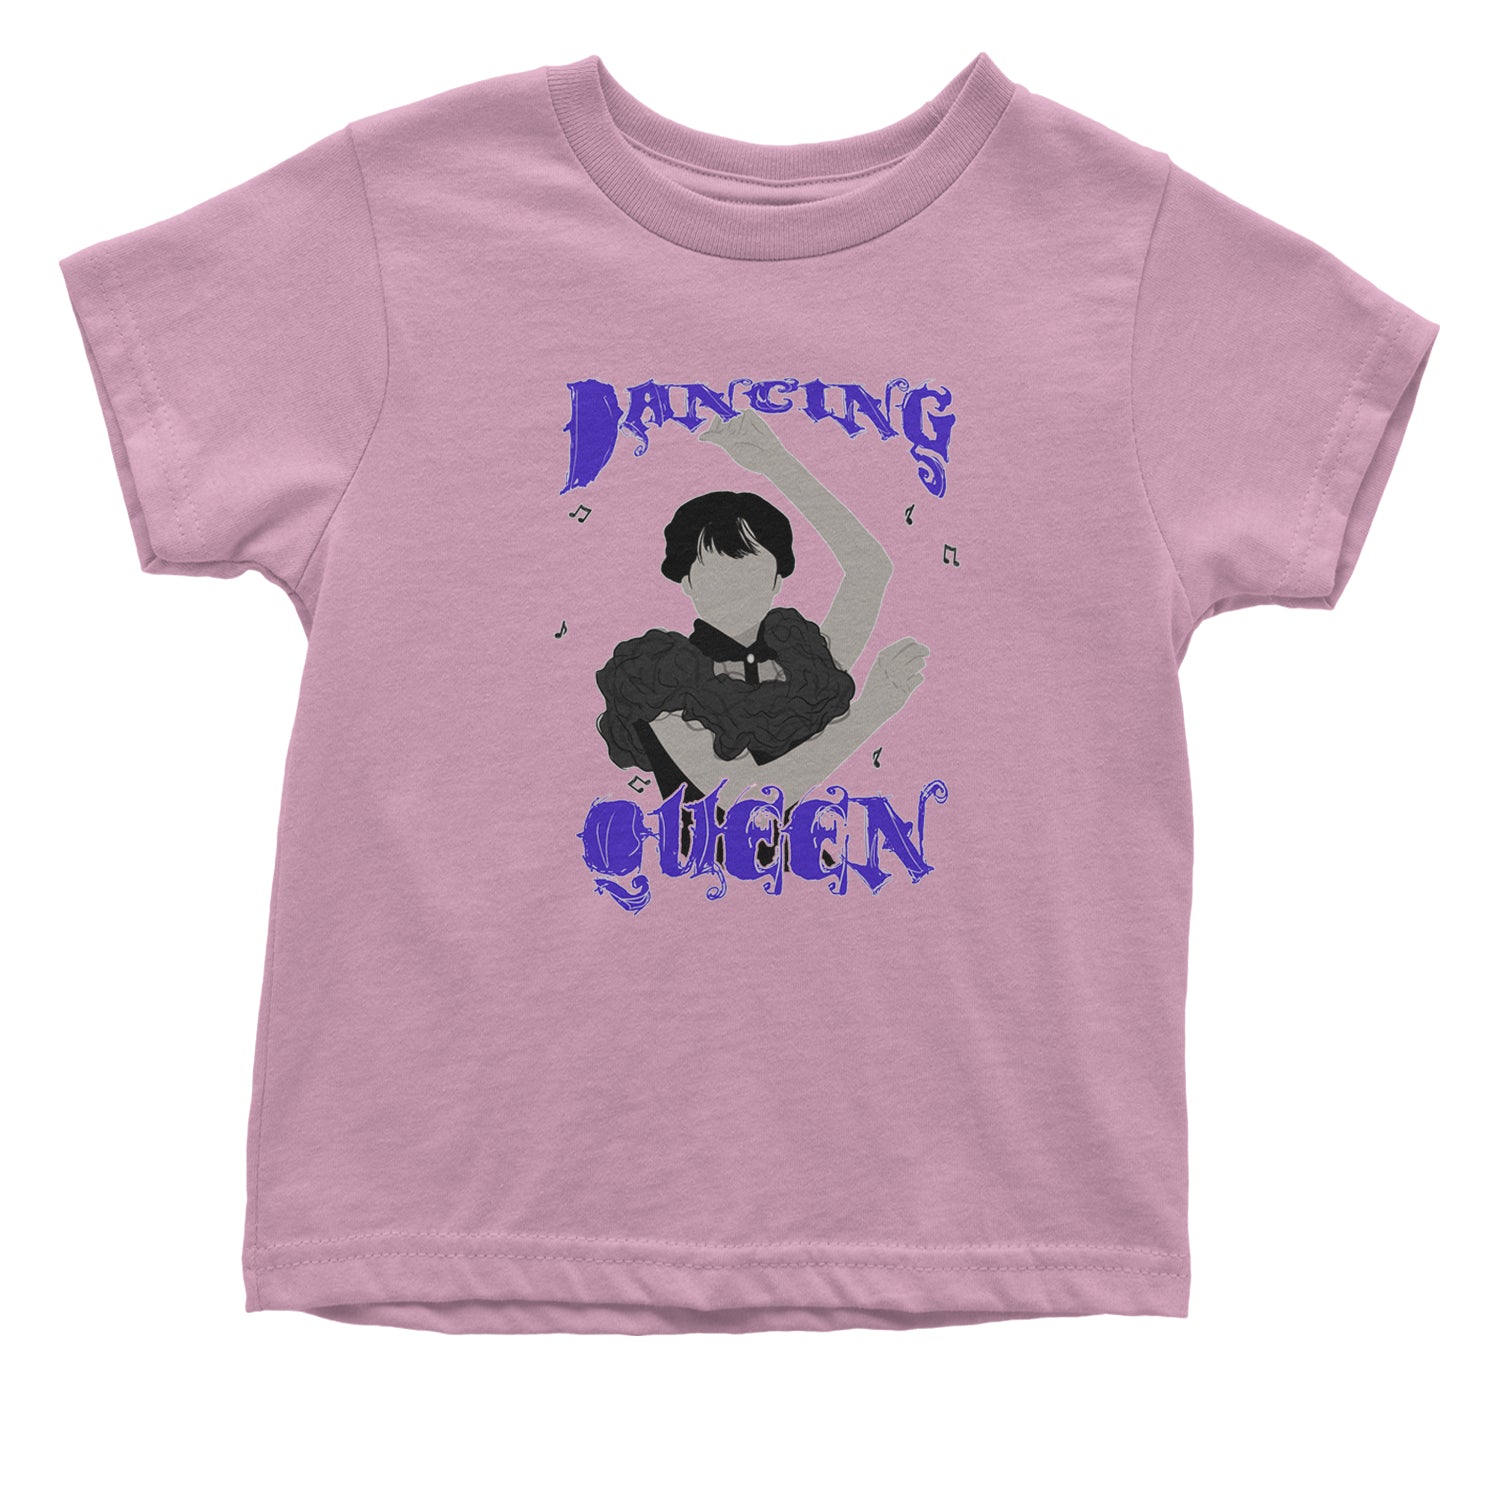 Wednesday Dancing Queen Infant One-Piece Romper Bodysuit and Toddler T-shirt black, On, we, wear, wednesdays by Expression Tees